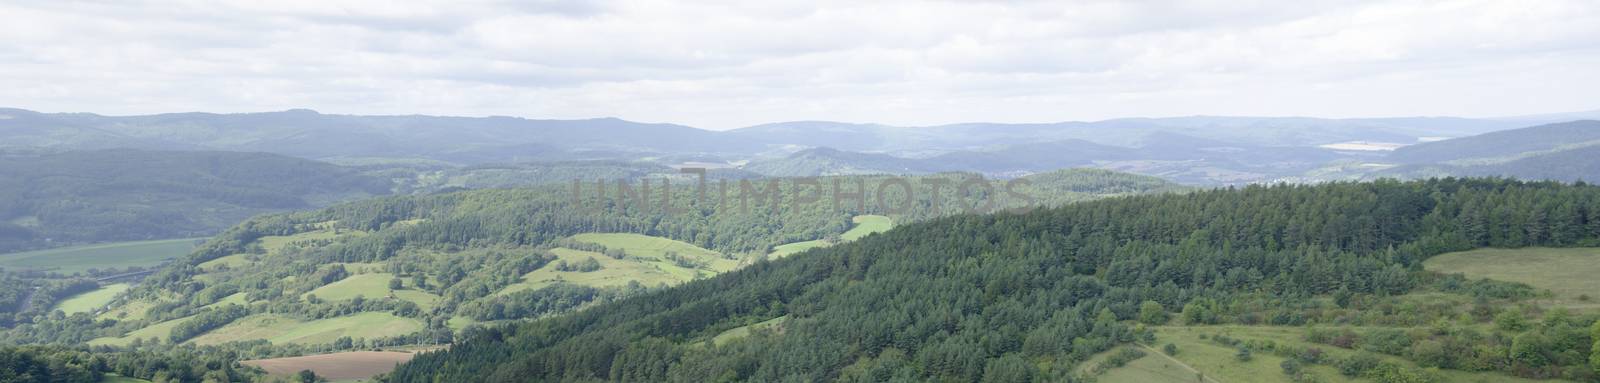 Panorama of landscape in central Germany with forests and fields